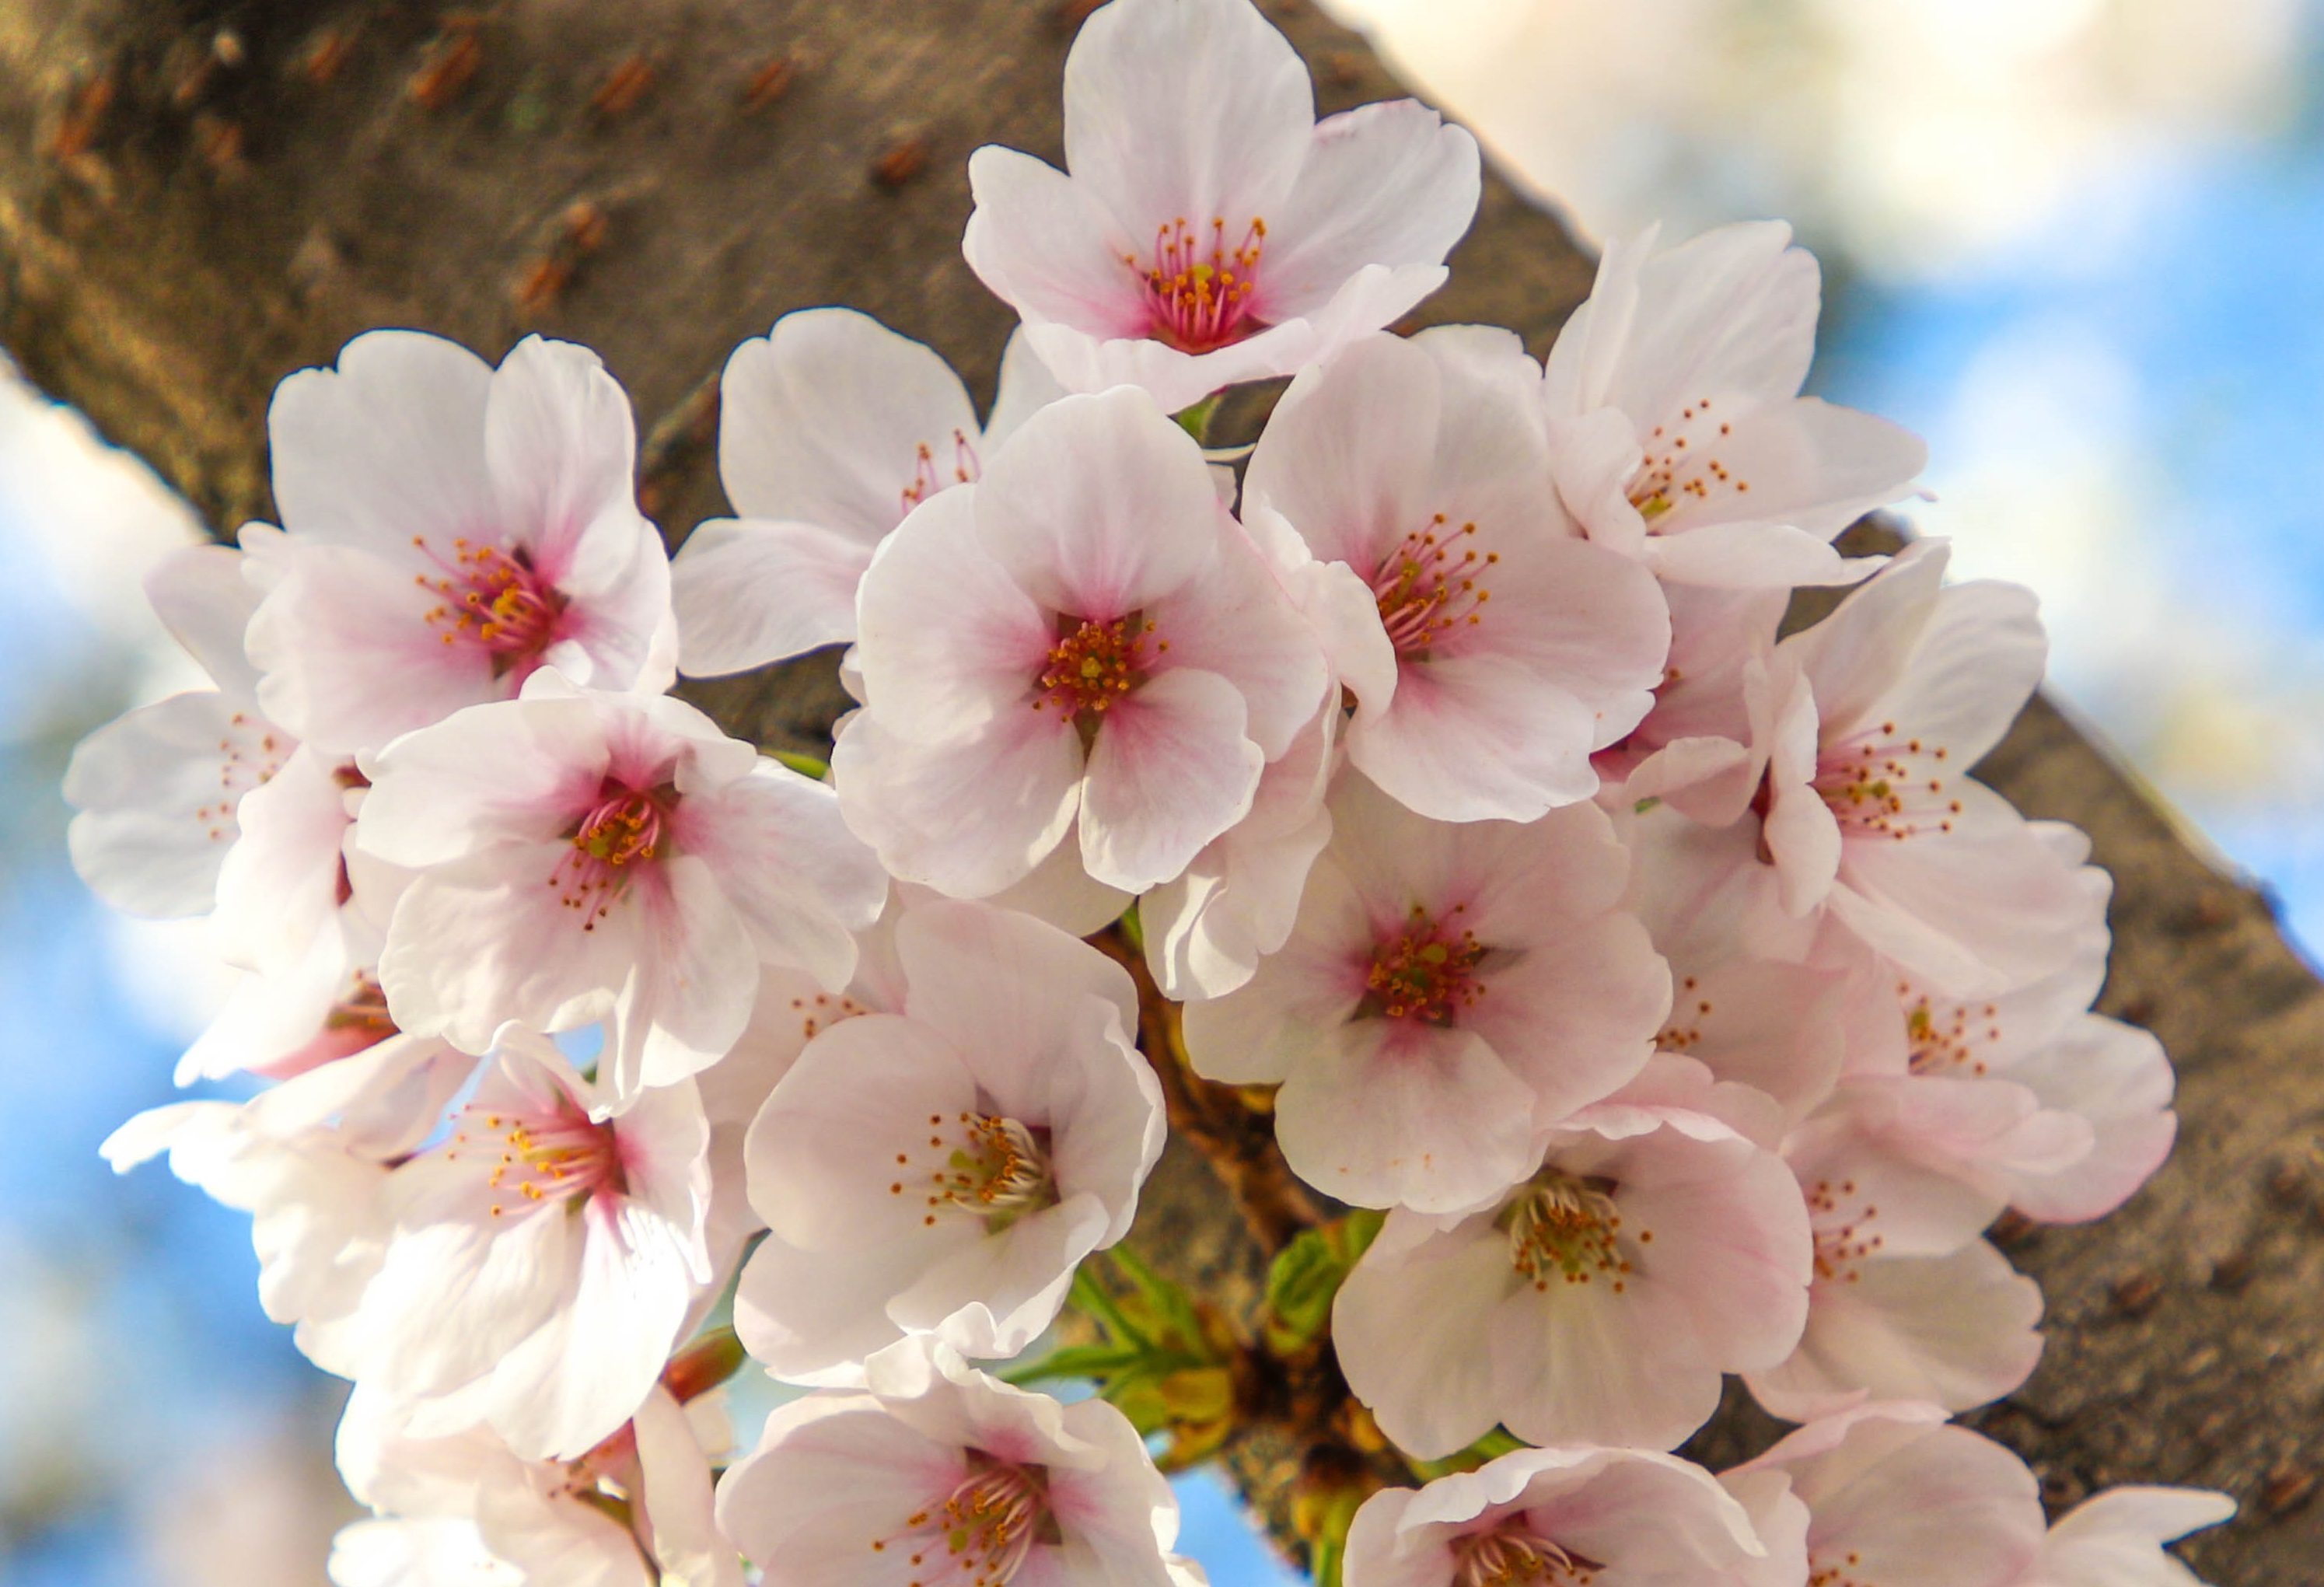 Cluster of pink cherry blossoms on a thin trunk